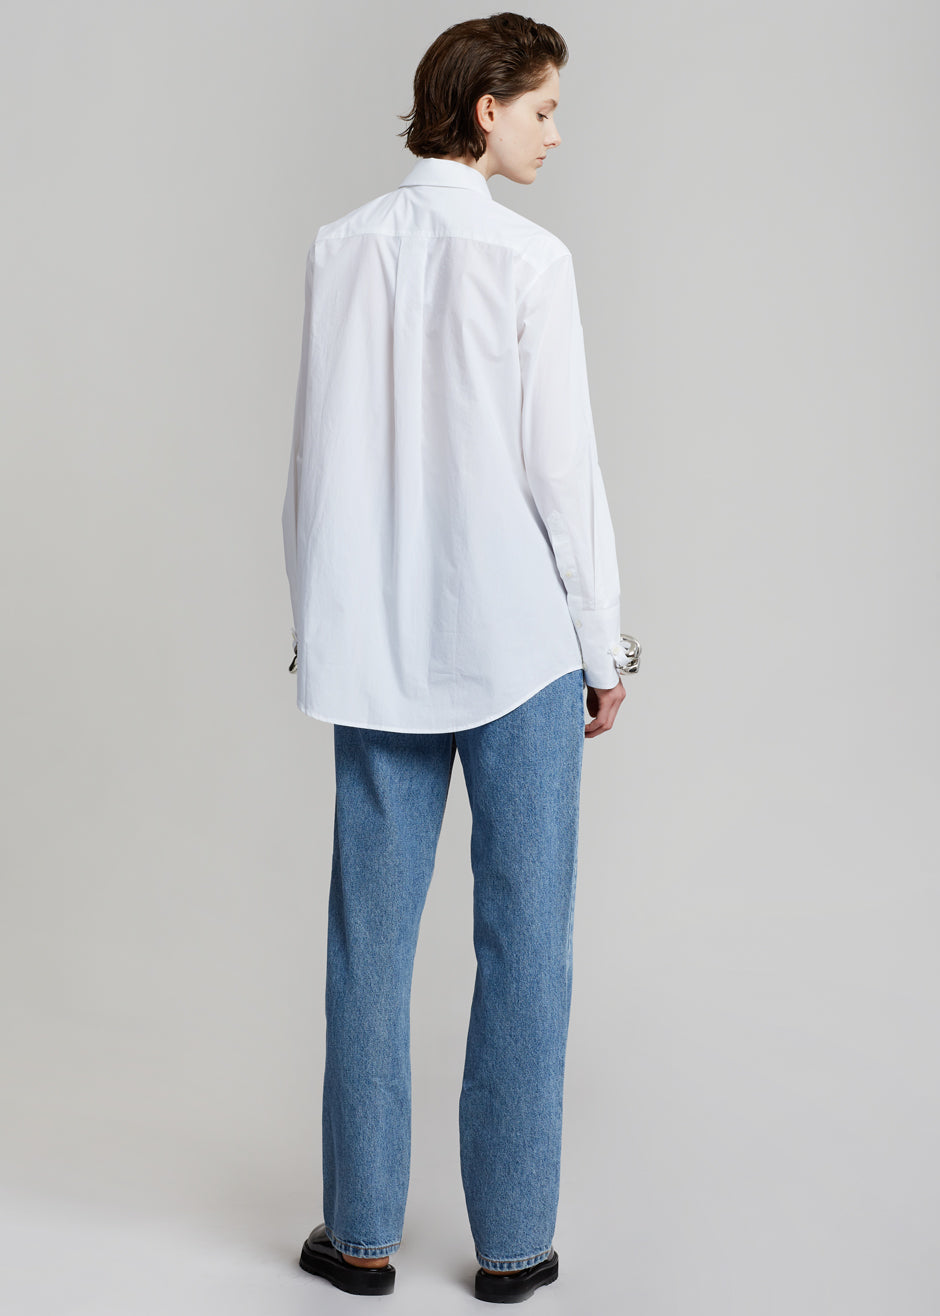 JW Anderson Silver Chain Link Shirt - White